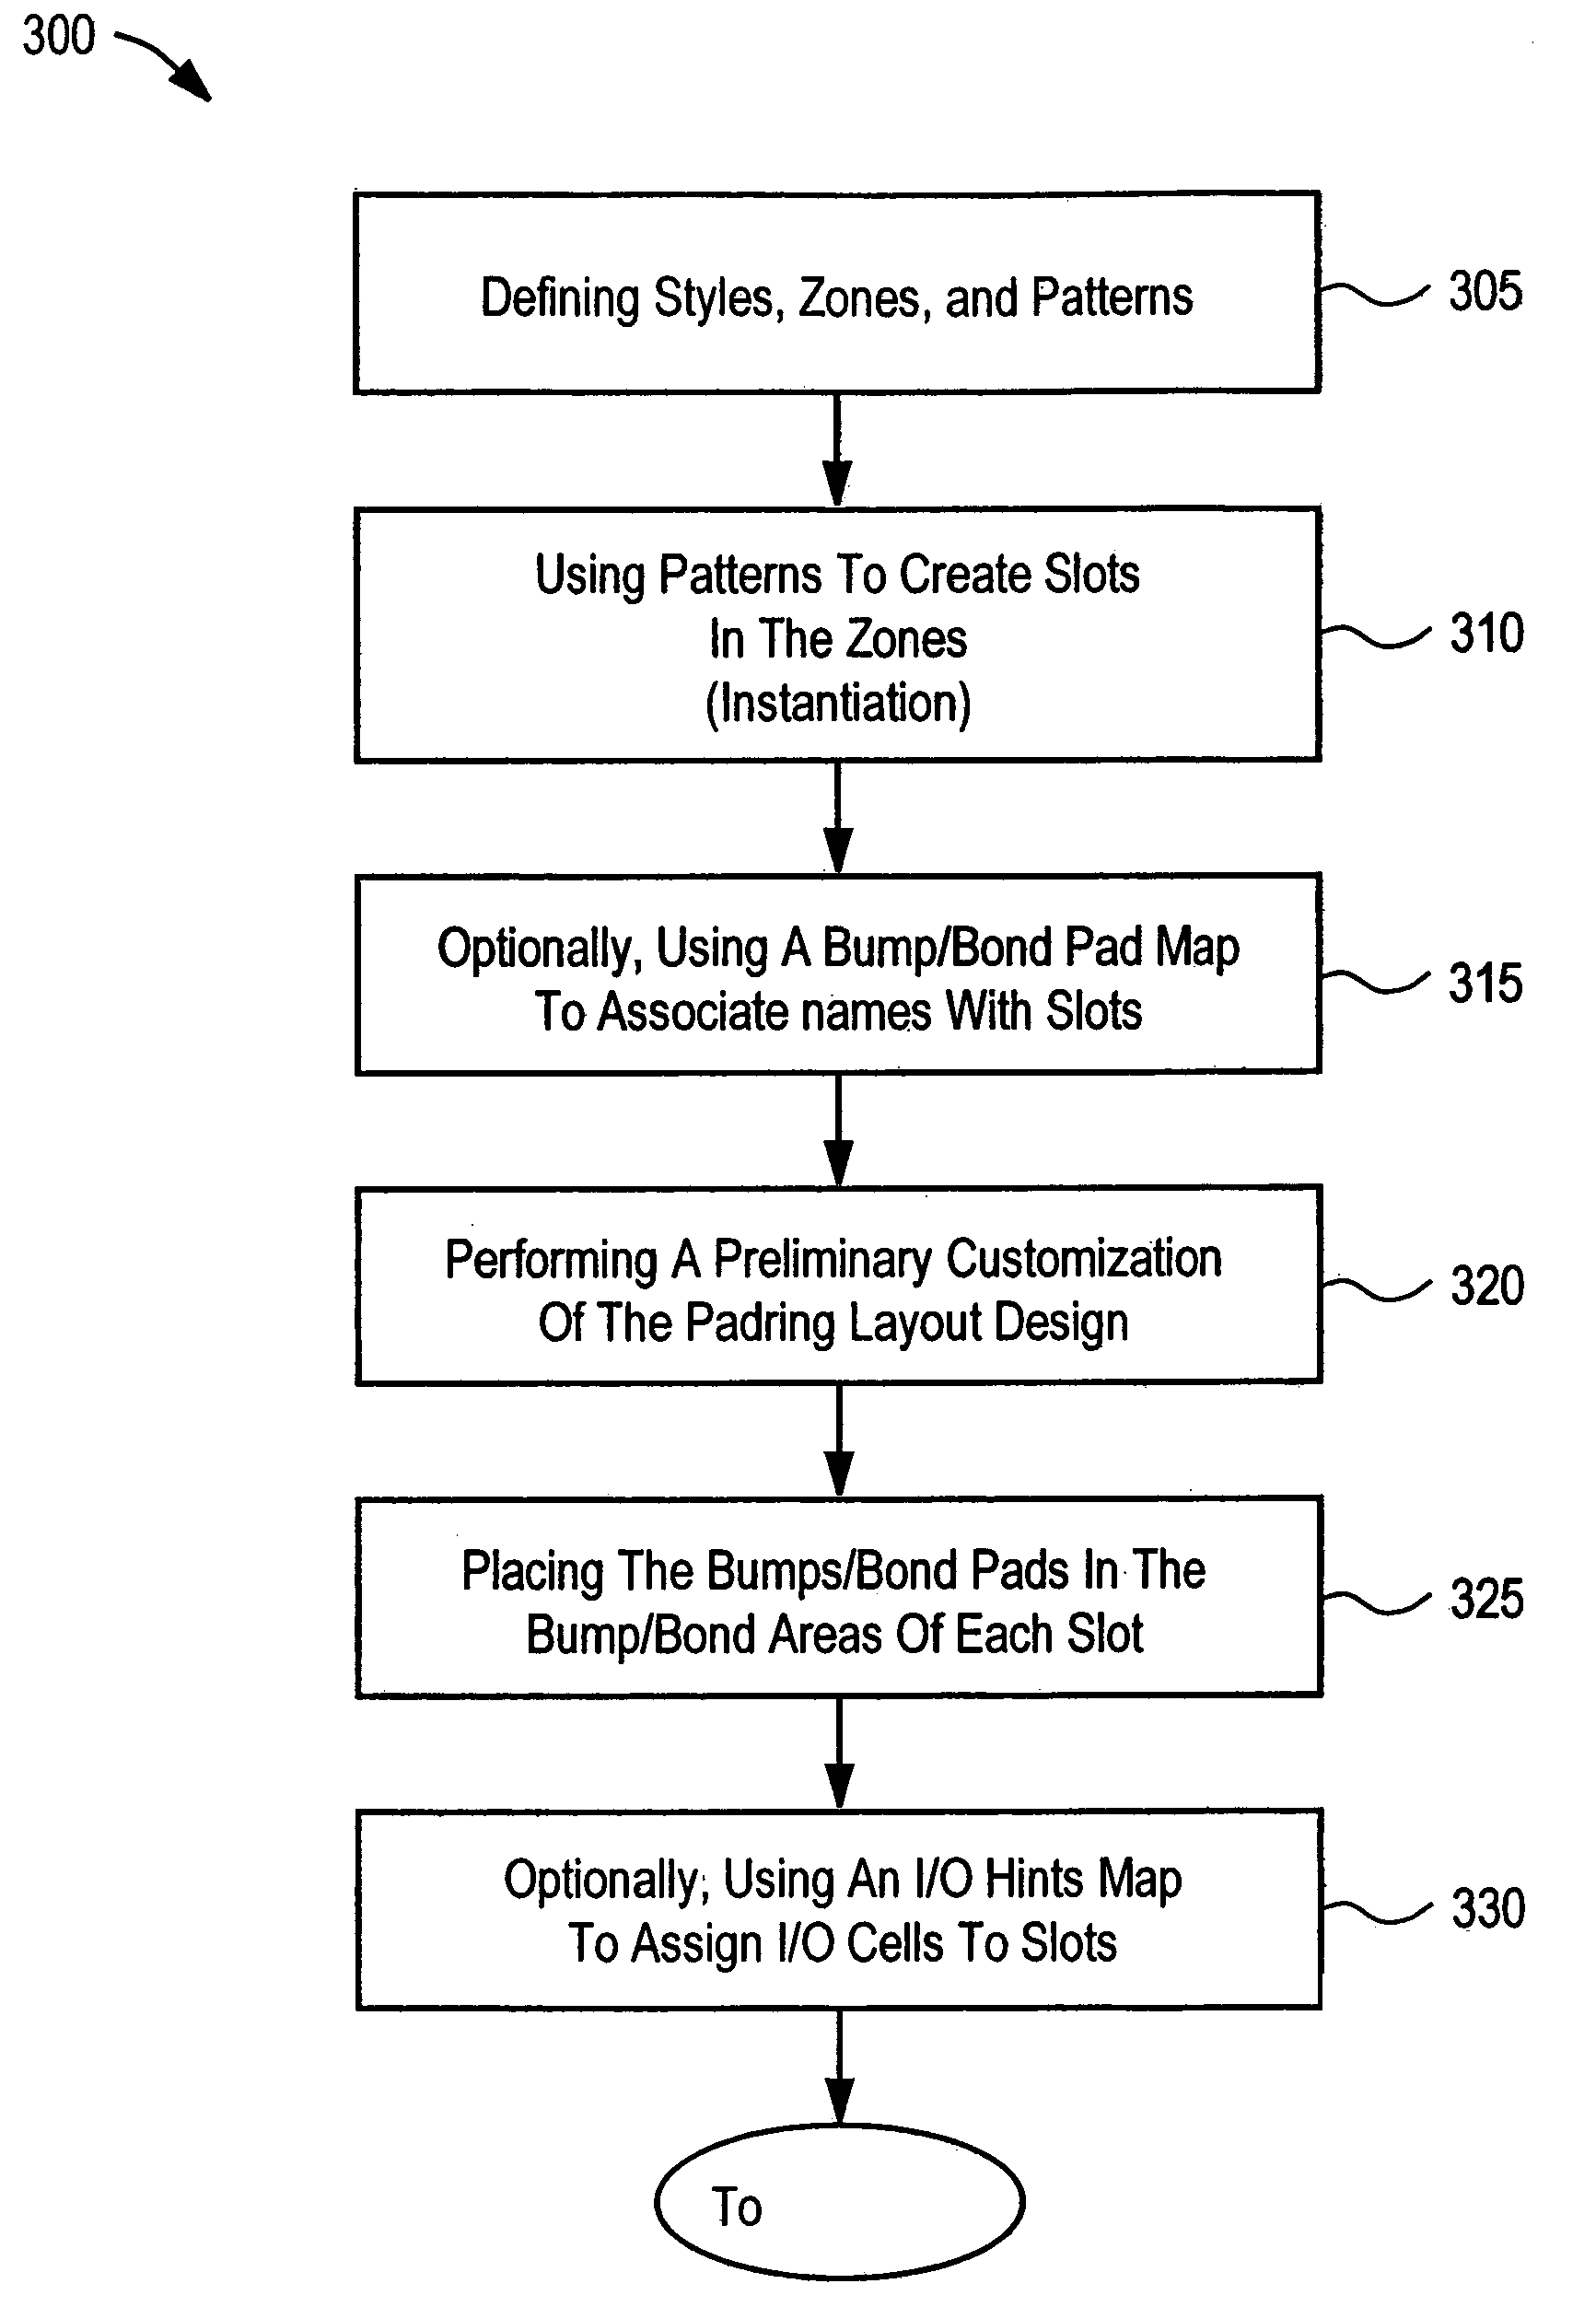 Method of optimizing placement and routing of edge logic in padring layout design